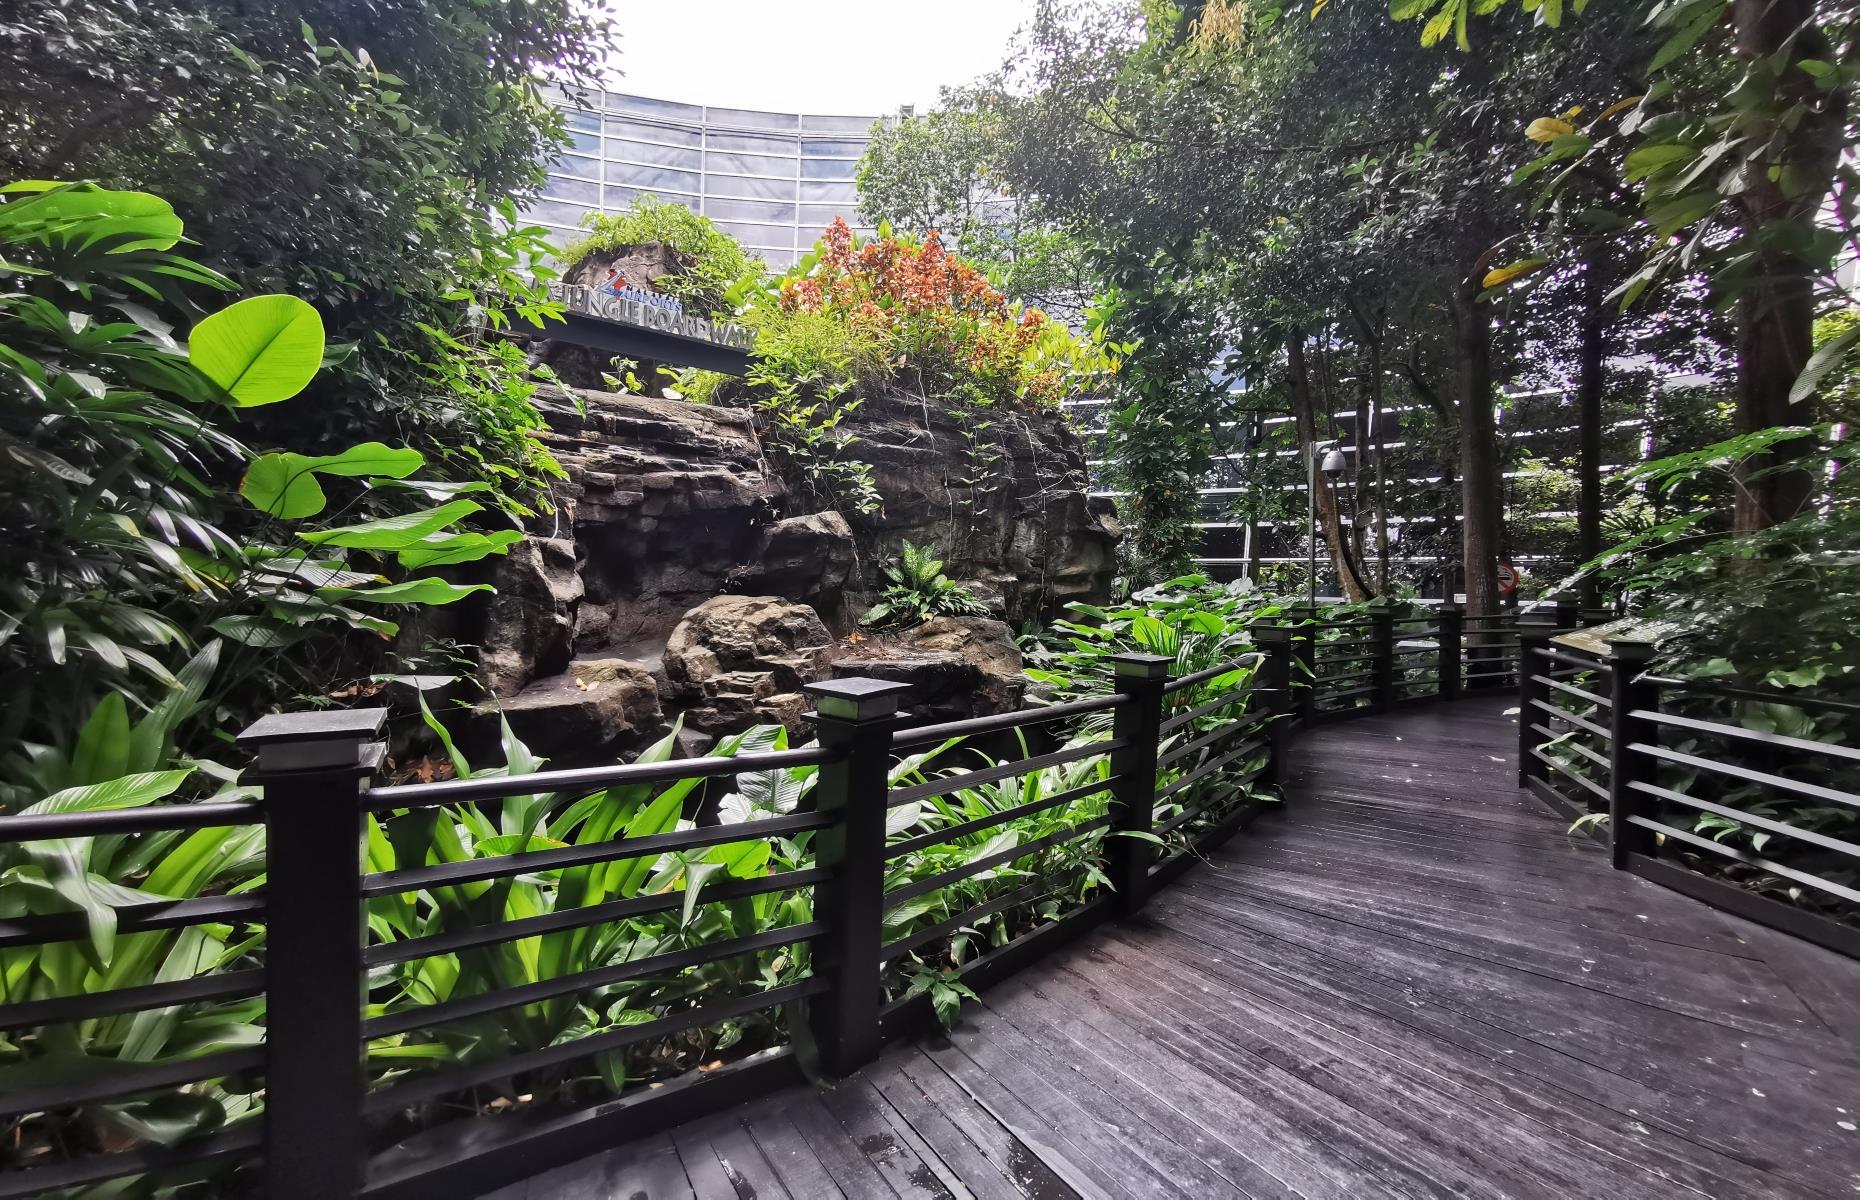 Few airports can claim they’re home to a jungle, but Kuala Lumpur’s International Airport has exactly that. A wooden boardwalk stretches into lush rainforest right in the middle of the terminal and there’s even a misty waterfall along the trail. Detailed plaques en route teach passengers about the Malaysian tropical flora that grows here.